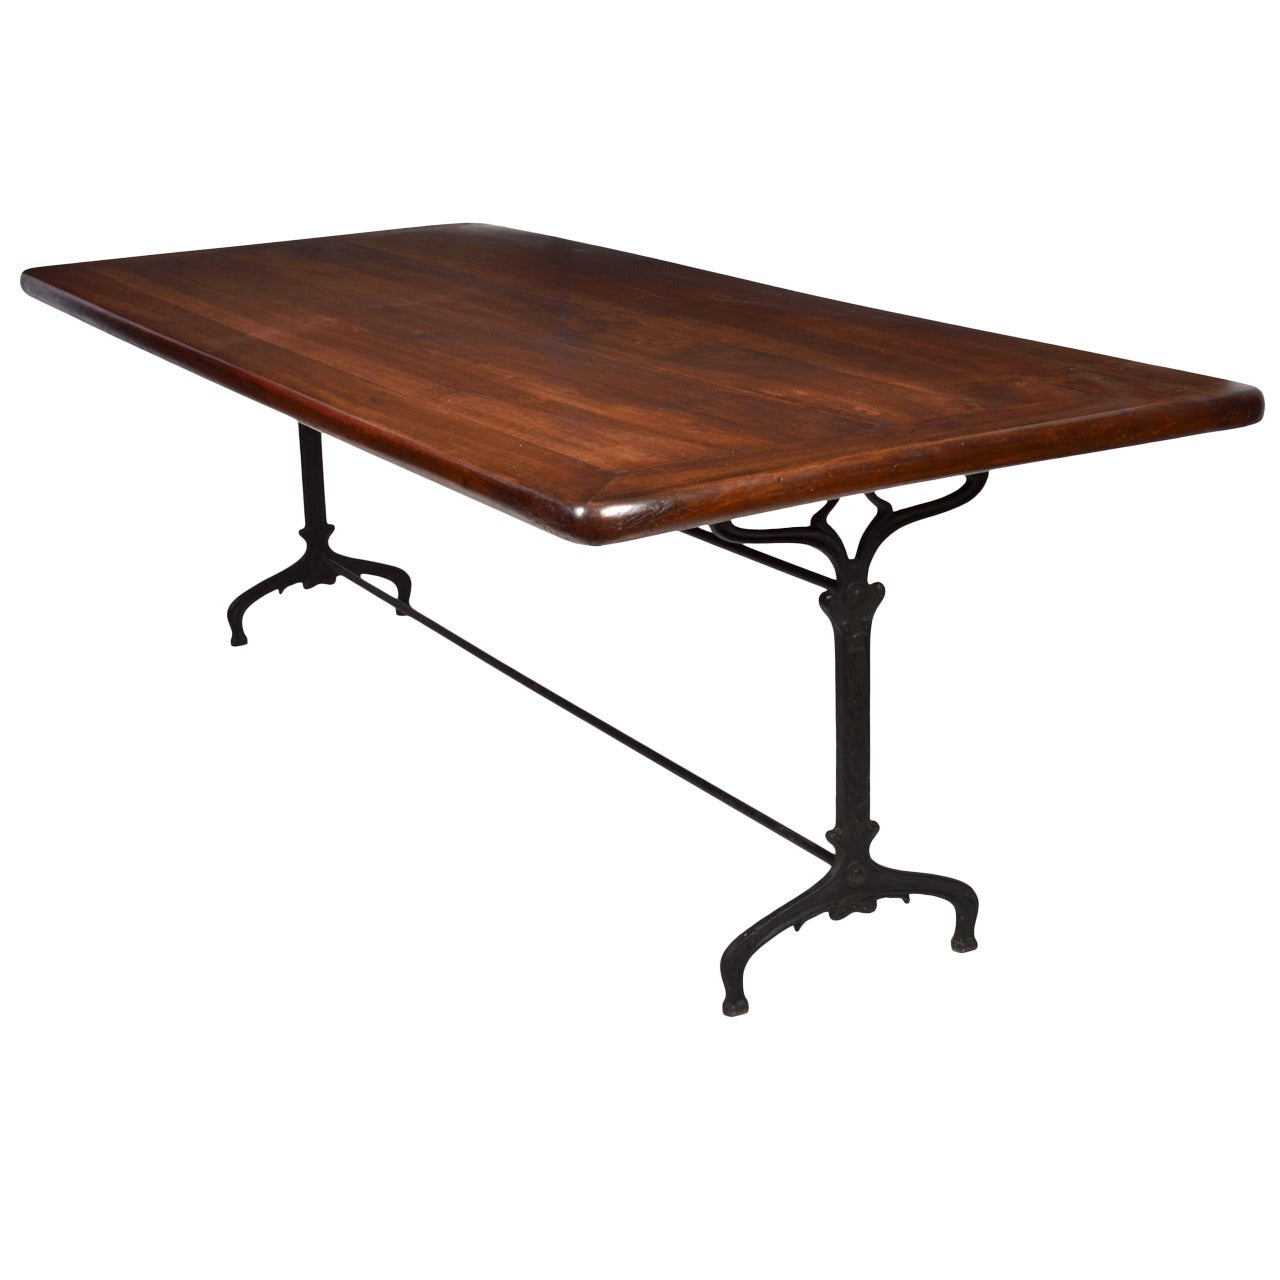 French Antique Solid Walnut Vineyard Table from Beaujolais Region